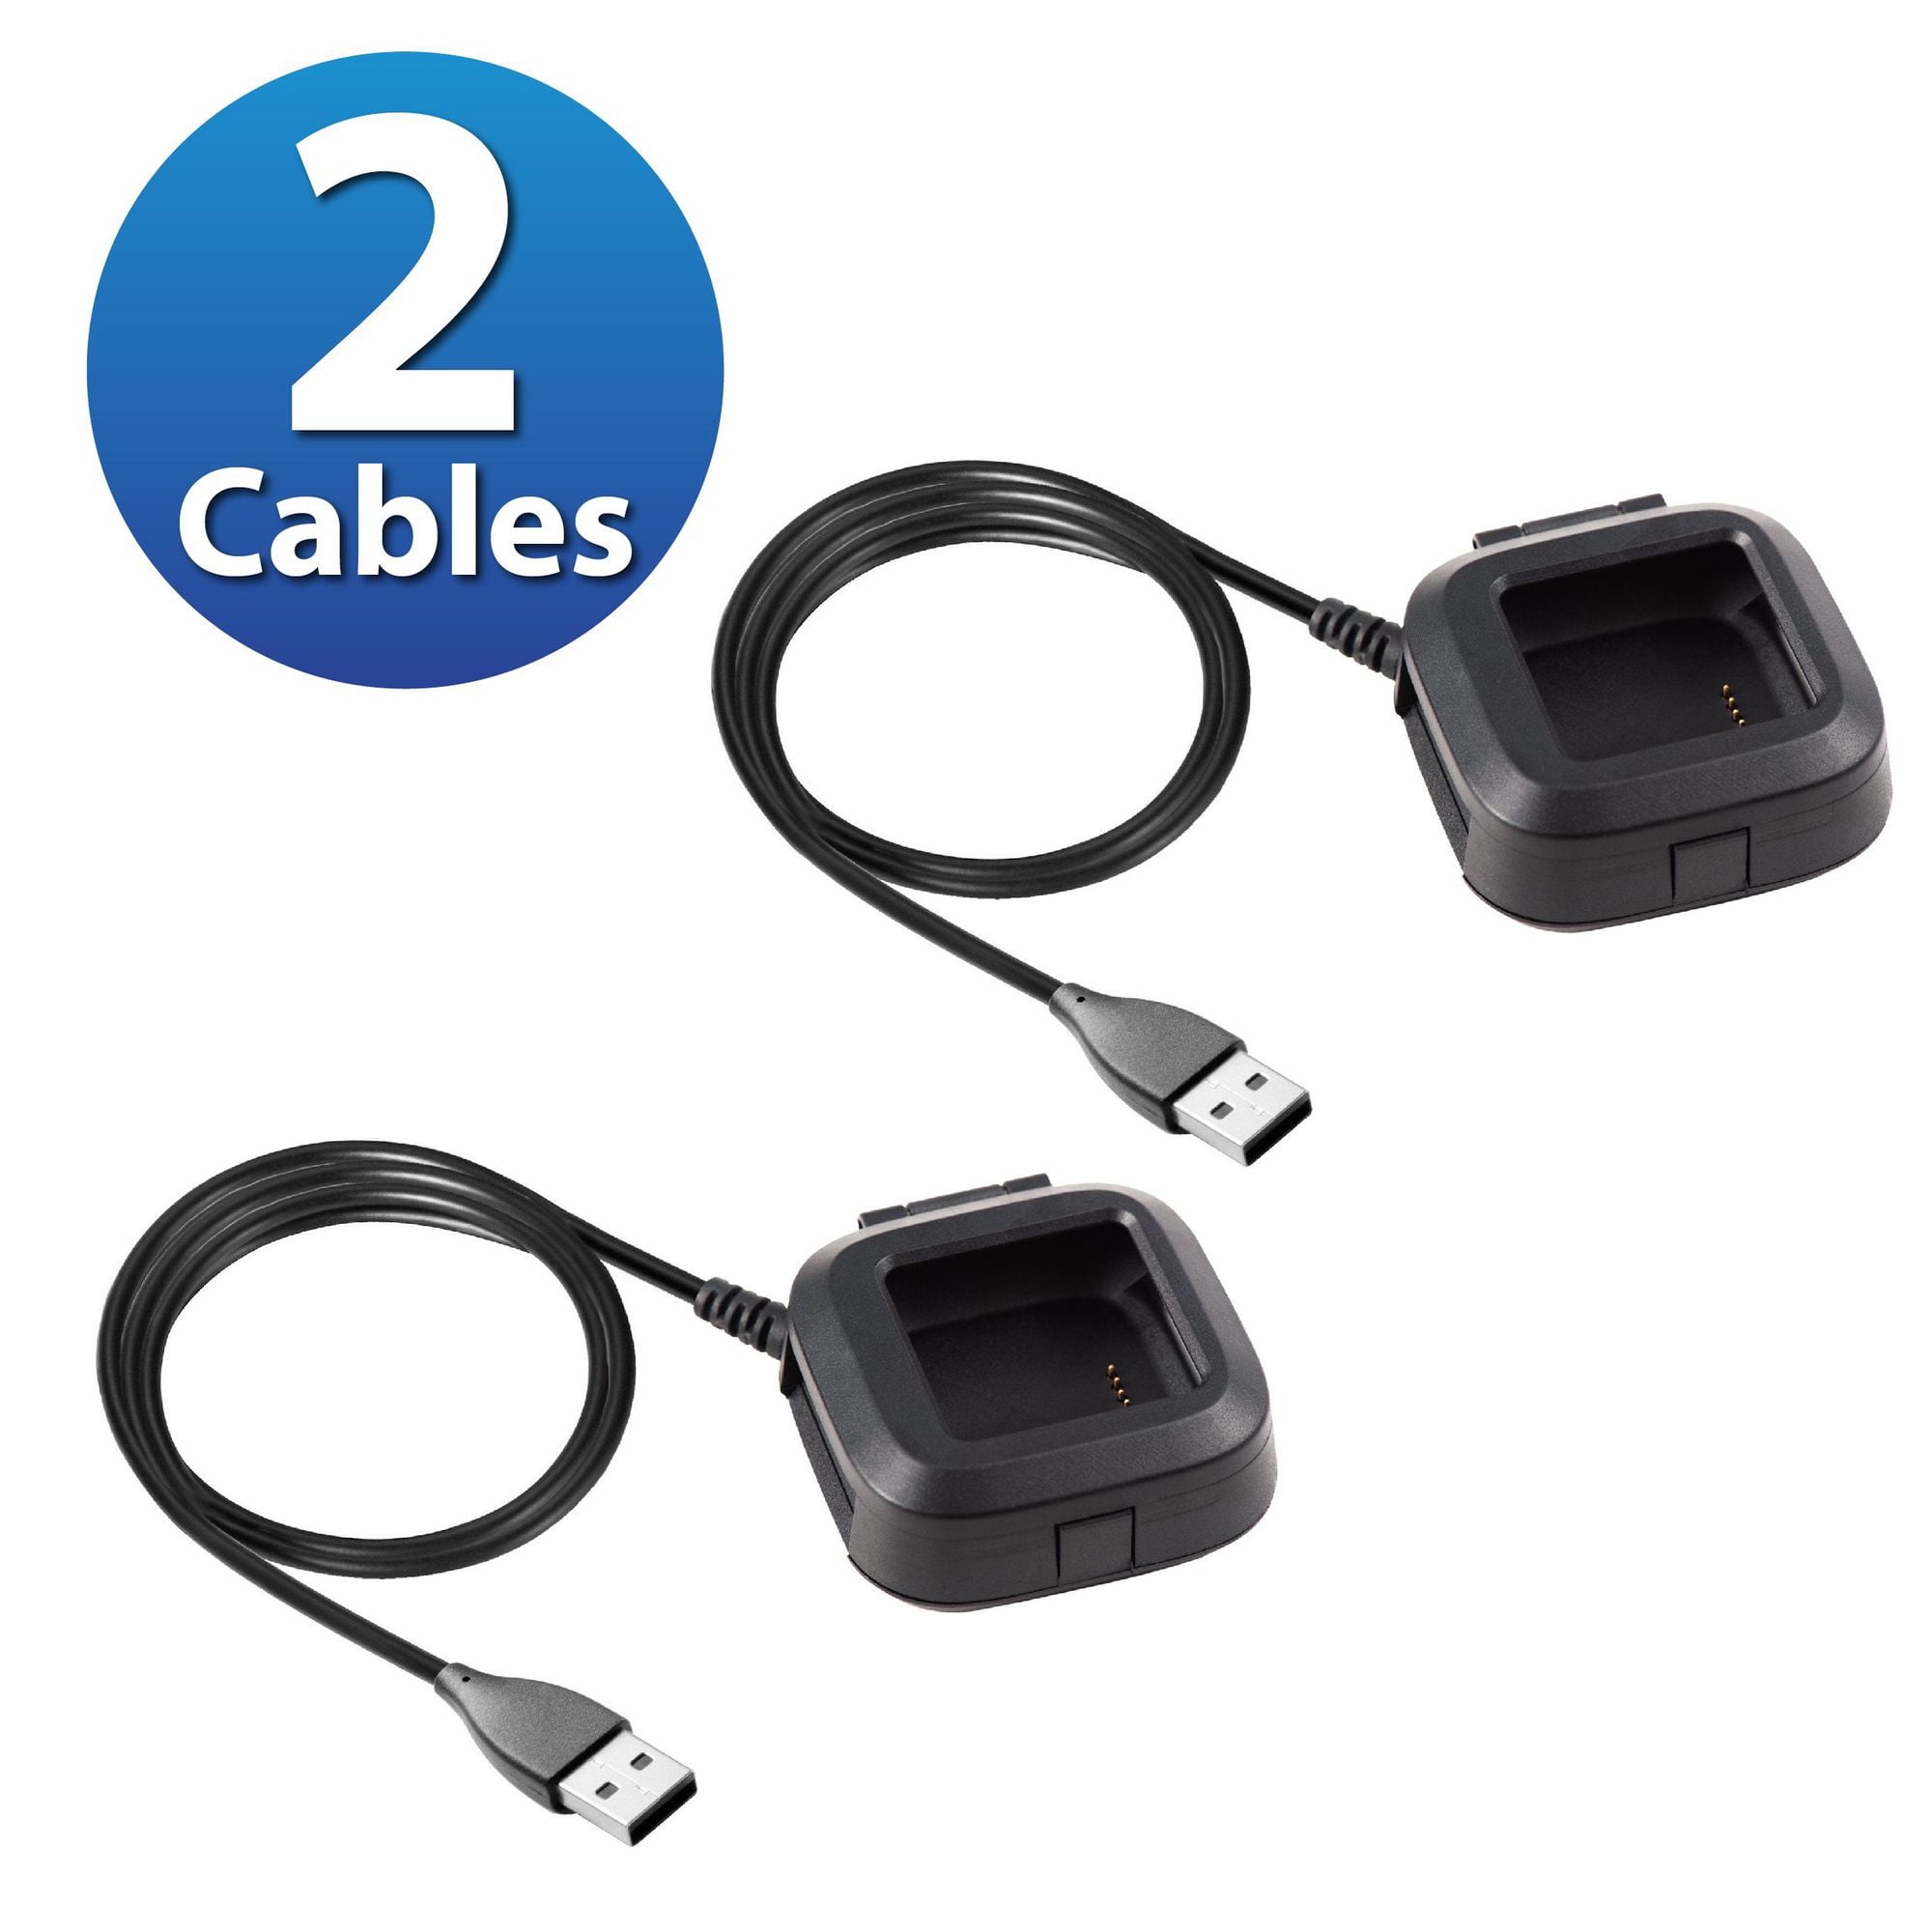 For Fitbit Versa 2 Charger Cable, USB 